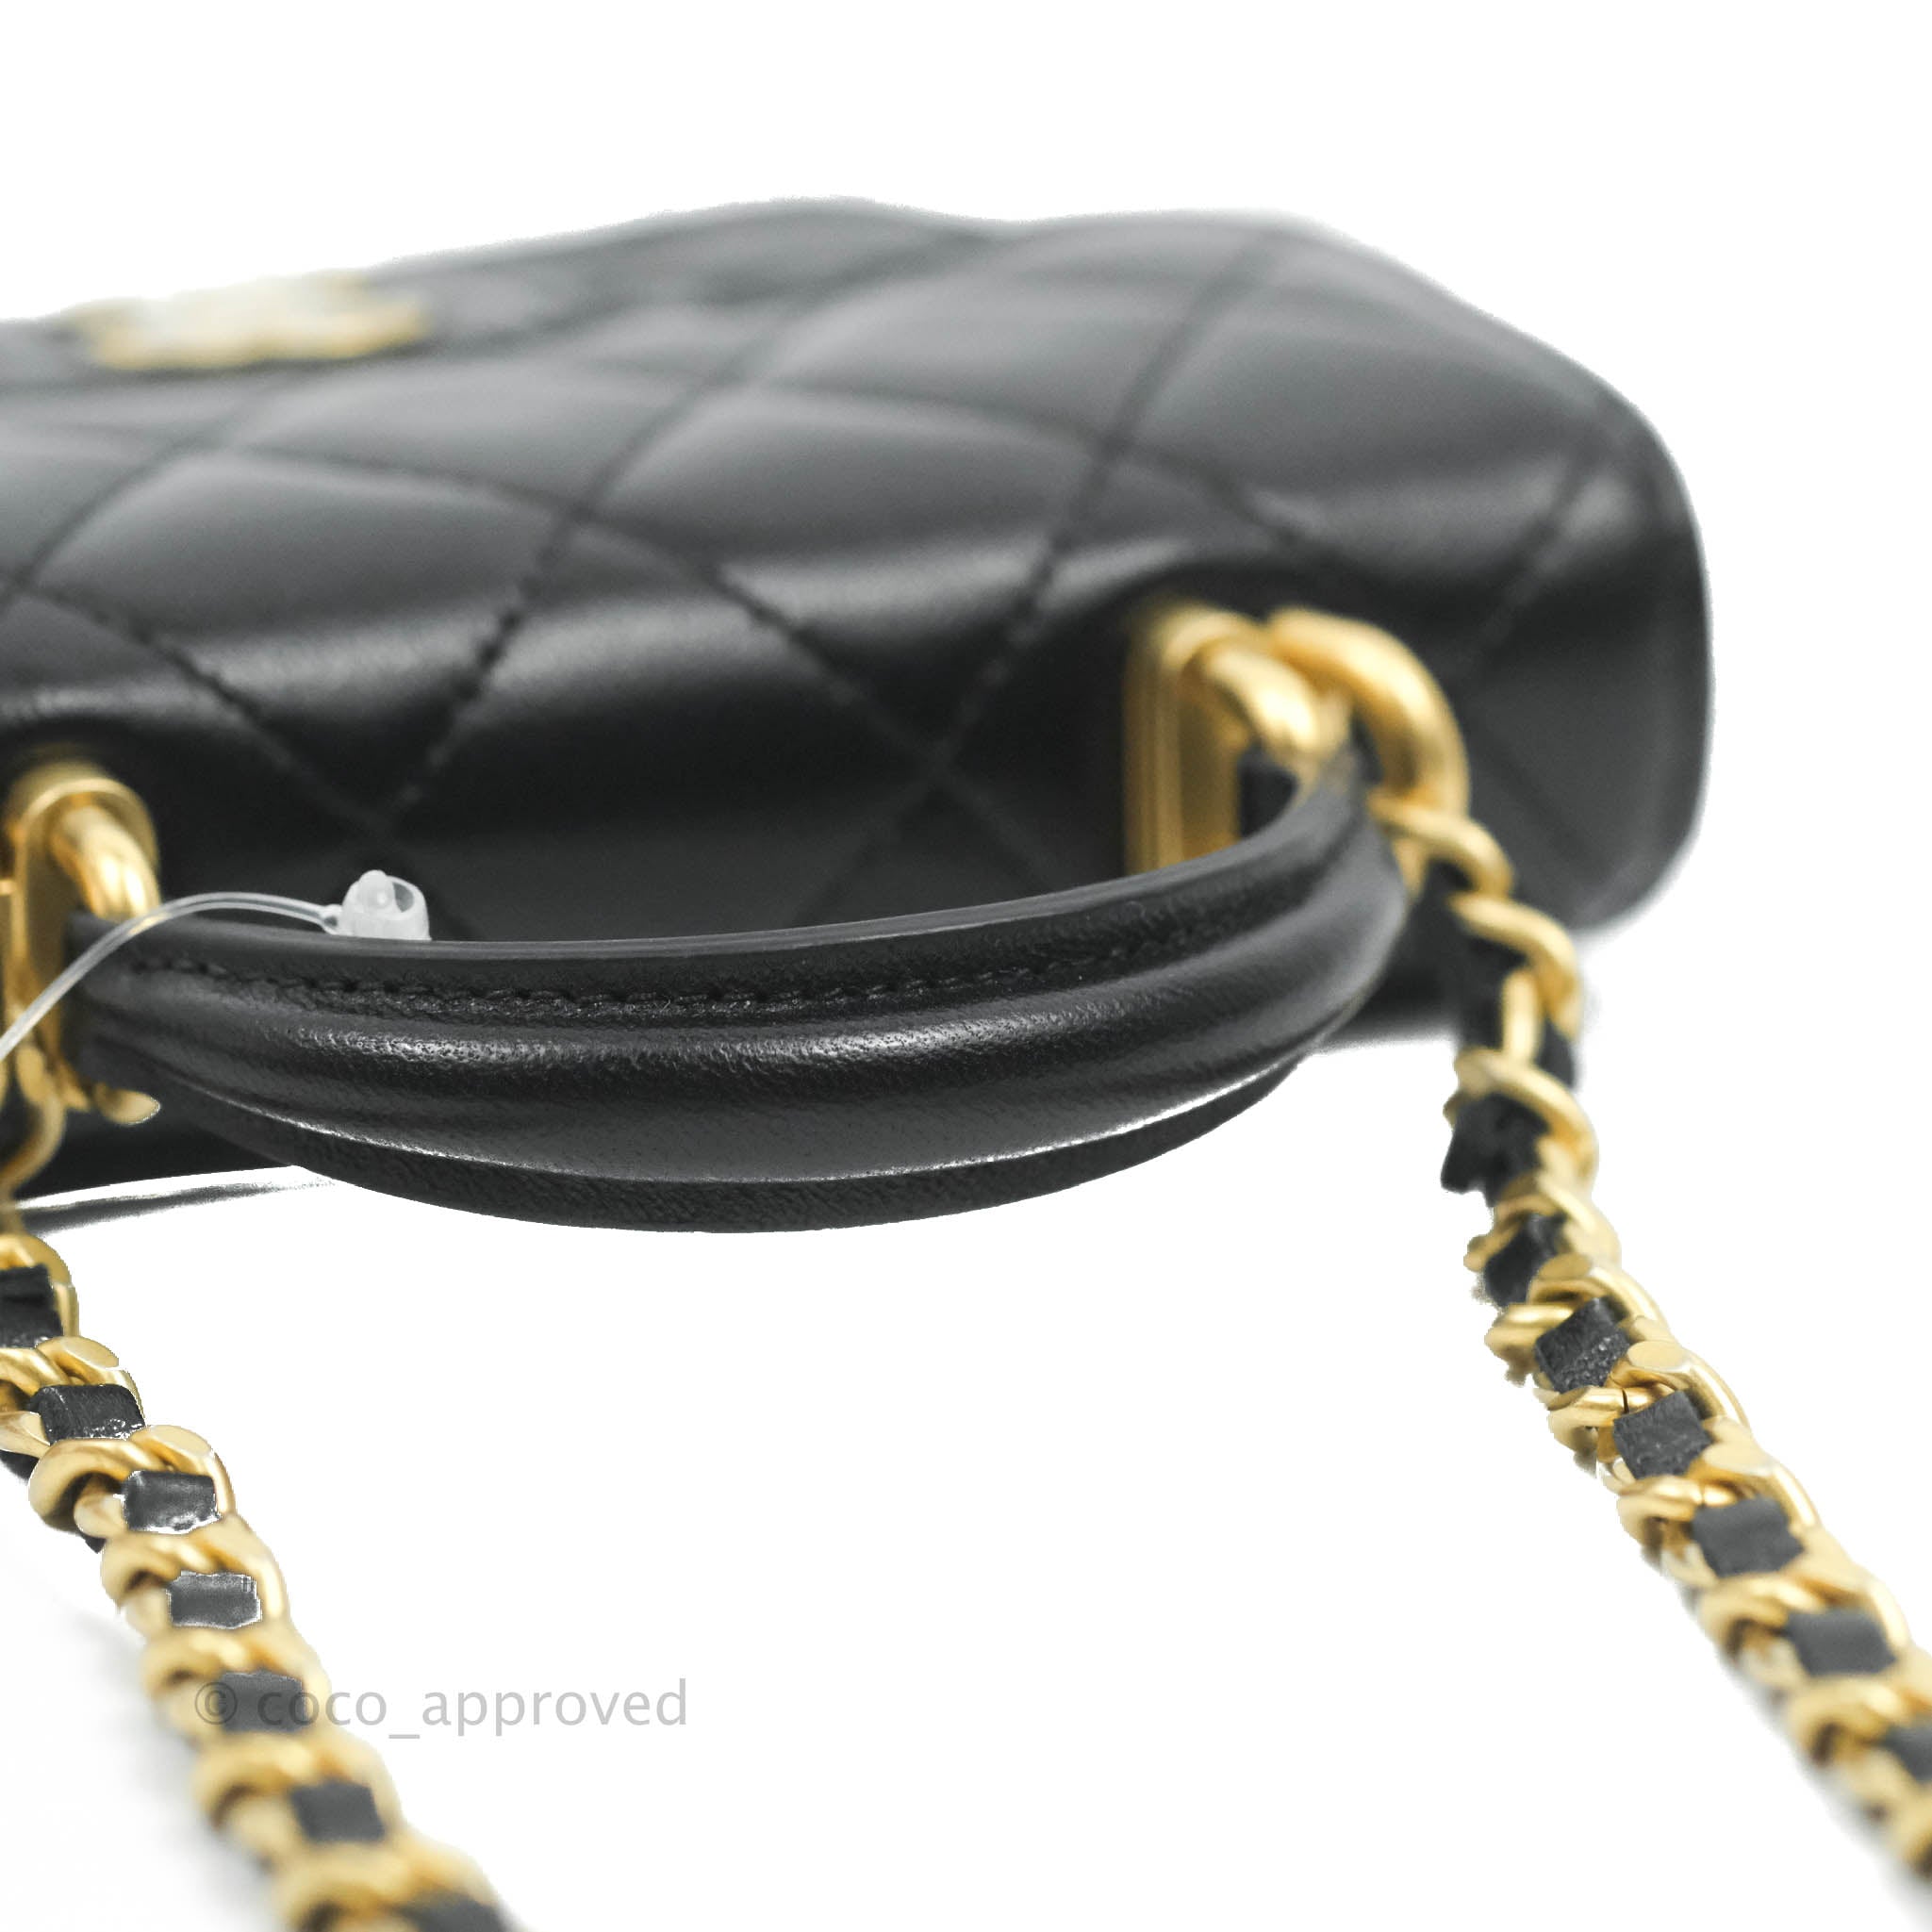 Chanel 19 Convertible Flap Coin Purse With Chain Quilted Lambskin Black  23320124